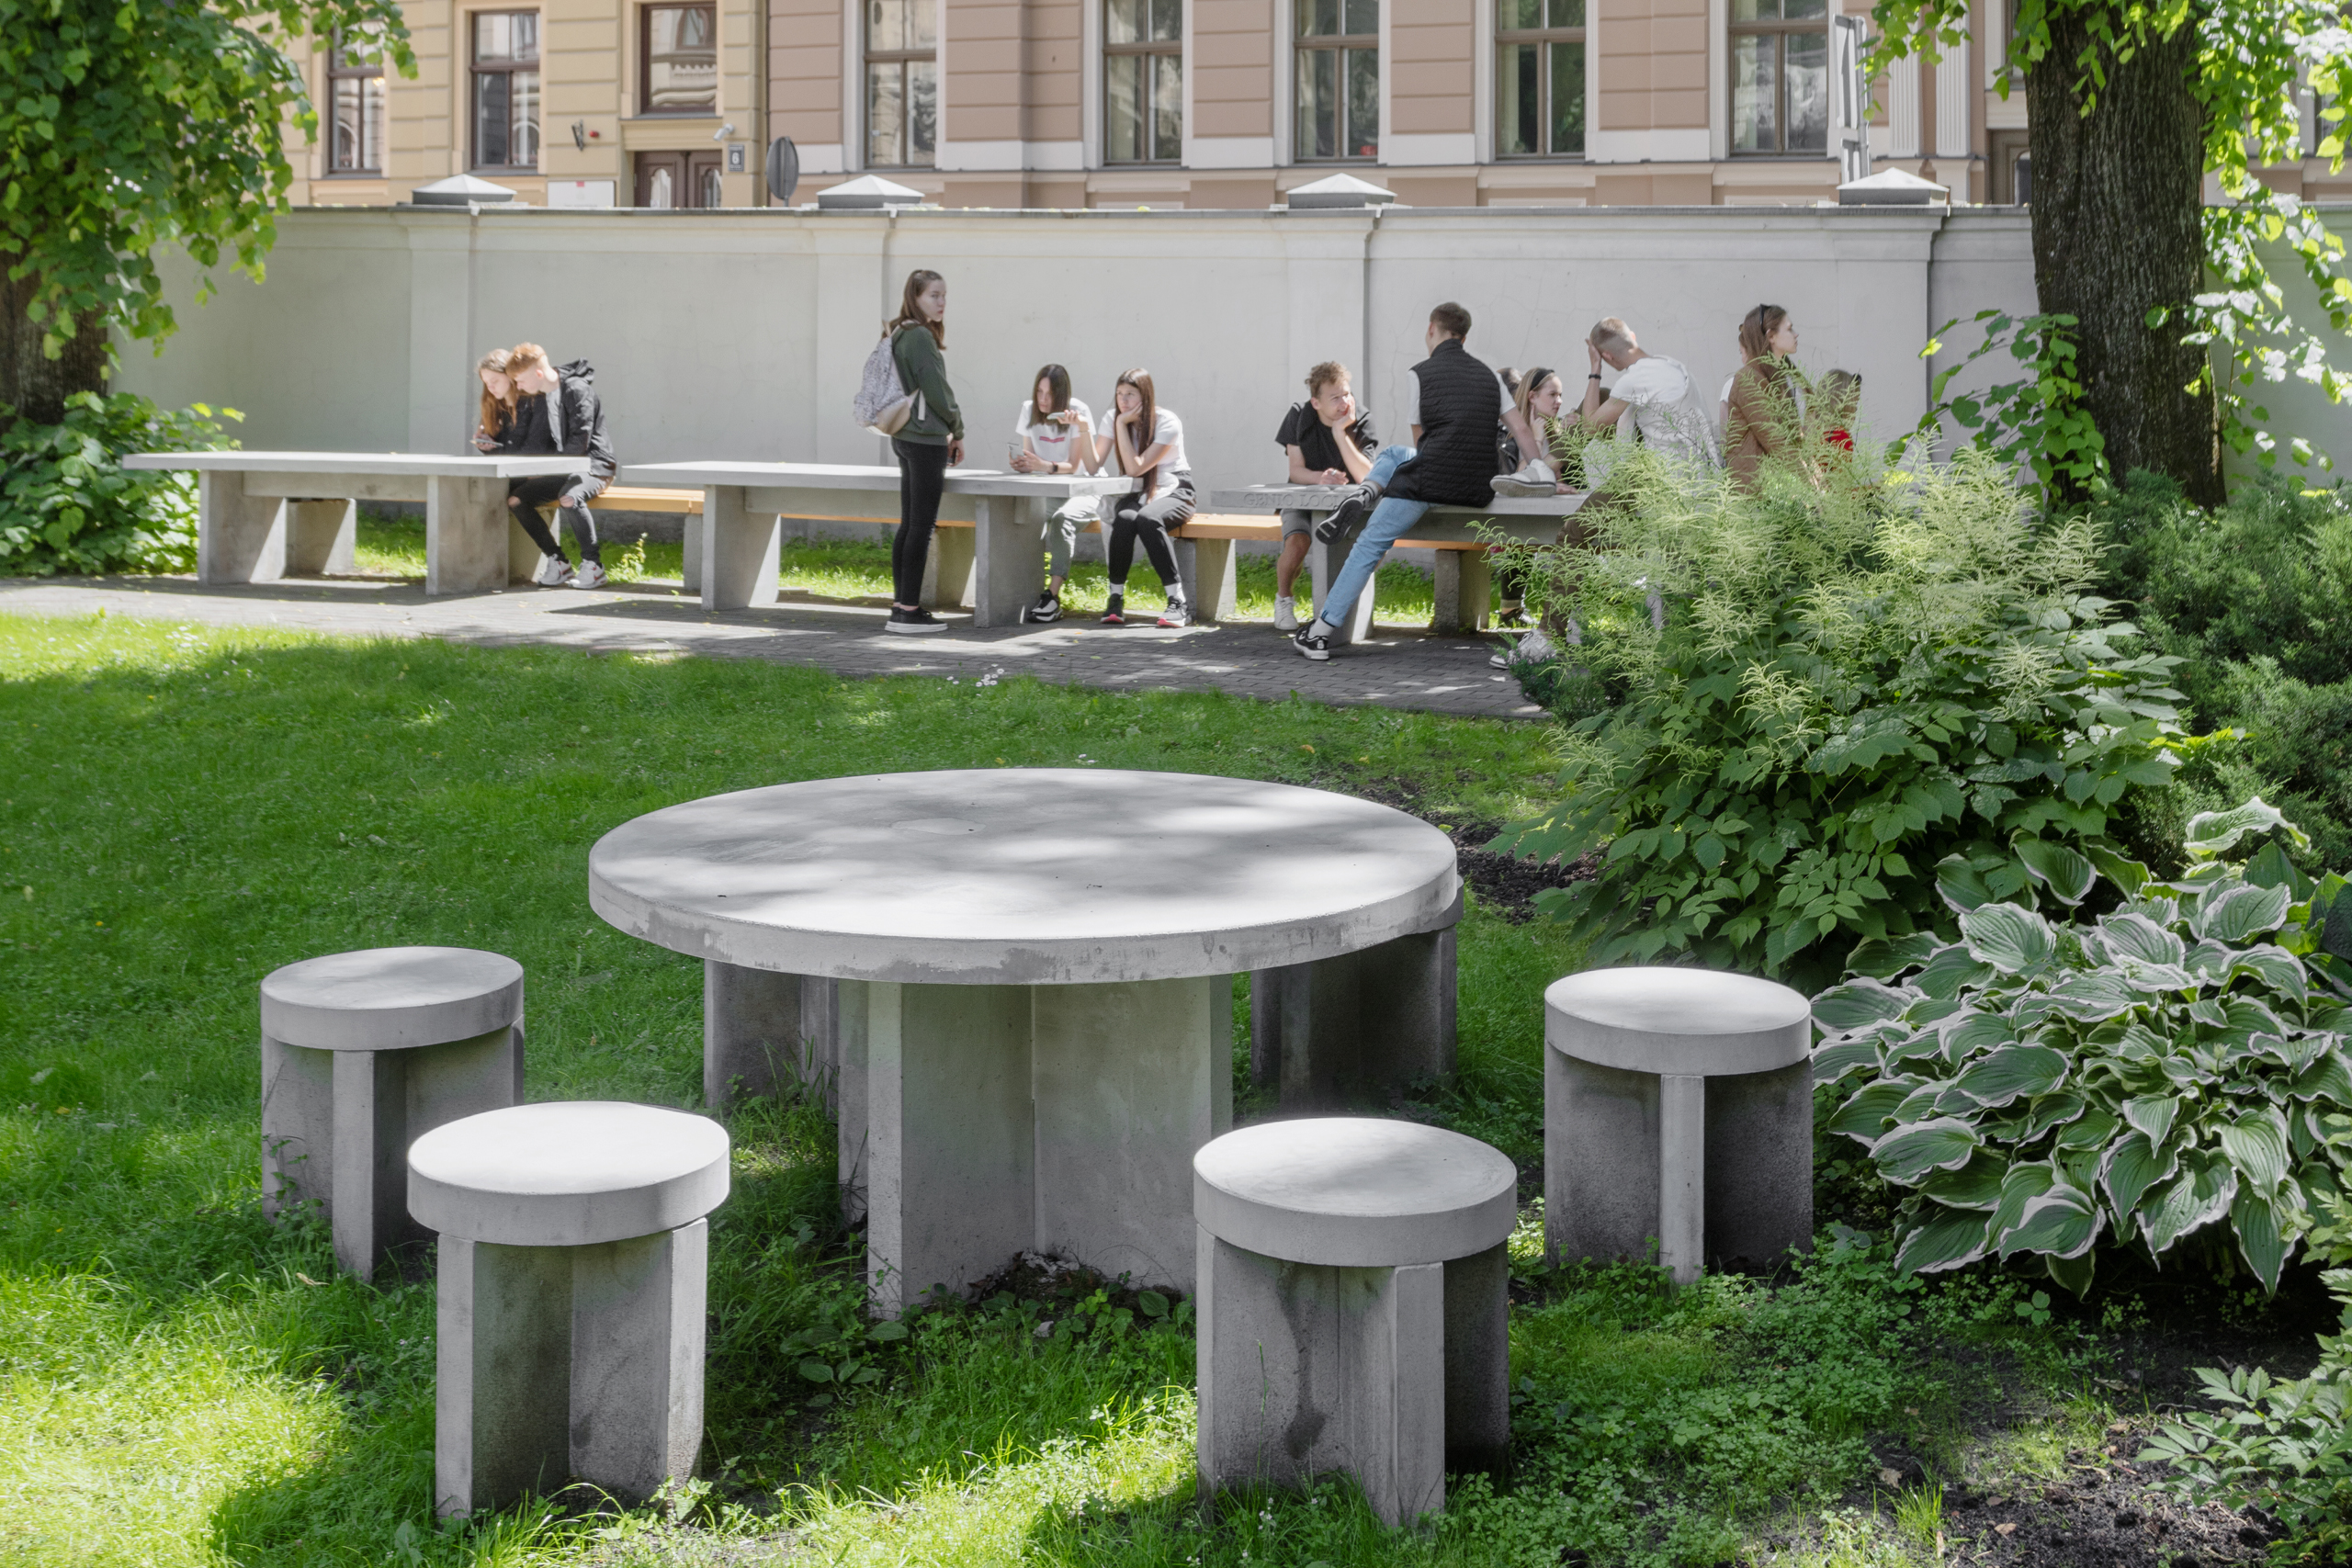 Museum garden. In the foreground is a circular concrete table with four chairs around it. In the background, green grass with trees and people sitting on concrete garden benches and tables.